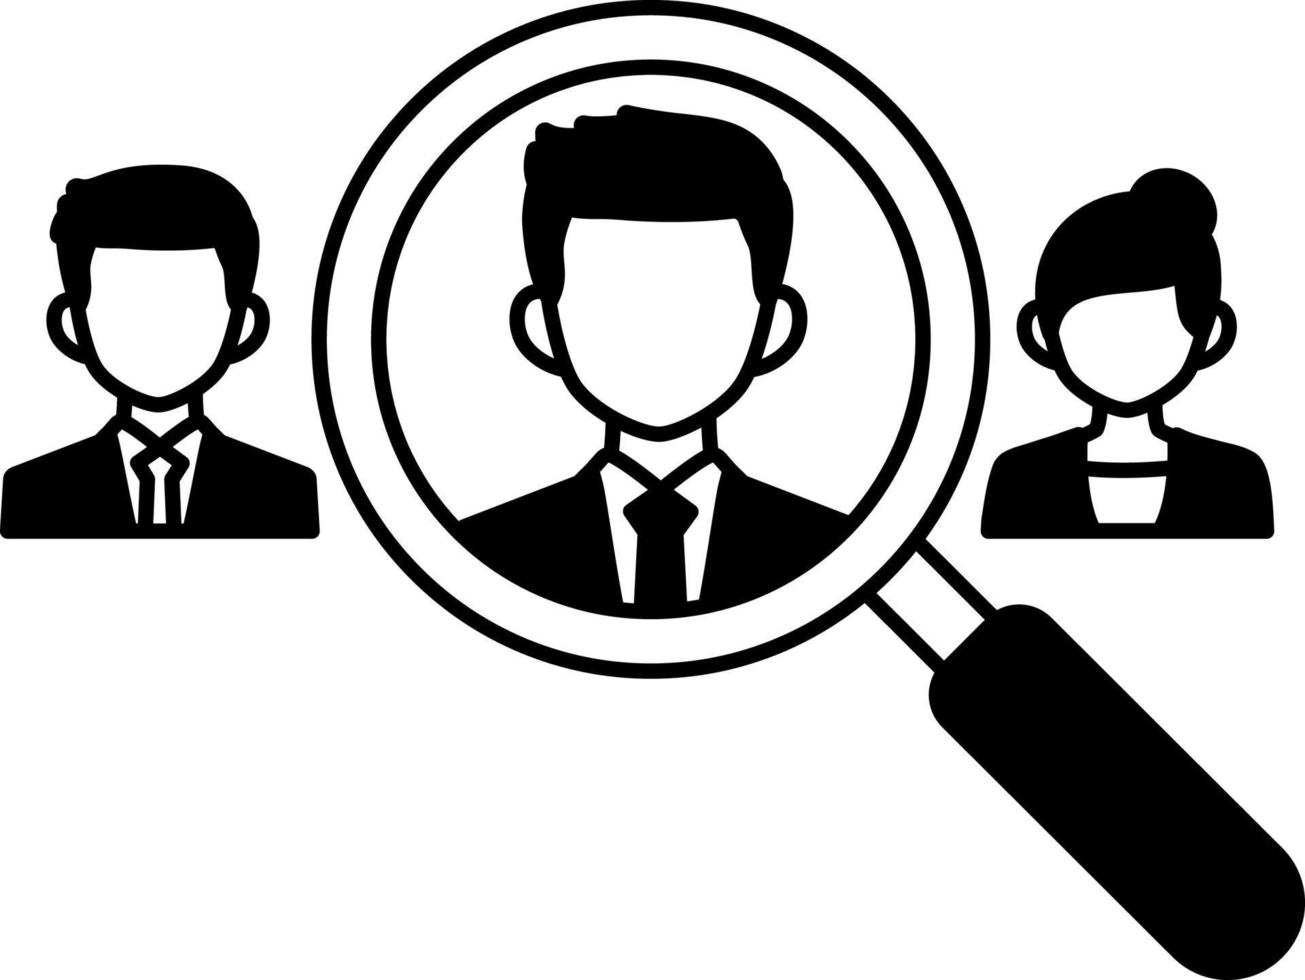 Recruitment looking team resource business magnifying company startup Semi-Solid Black and White vector